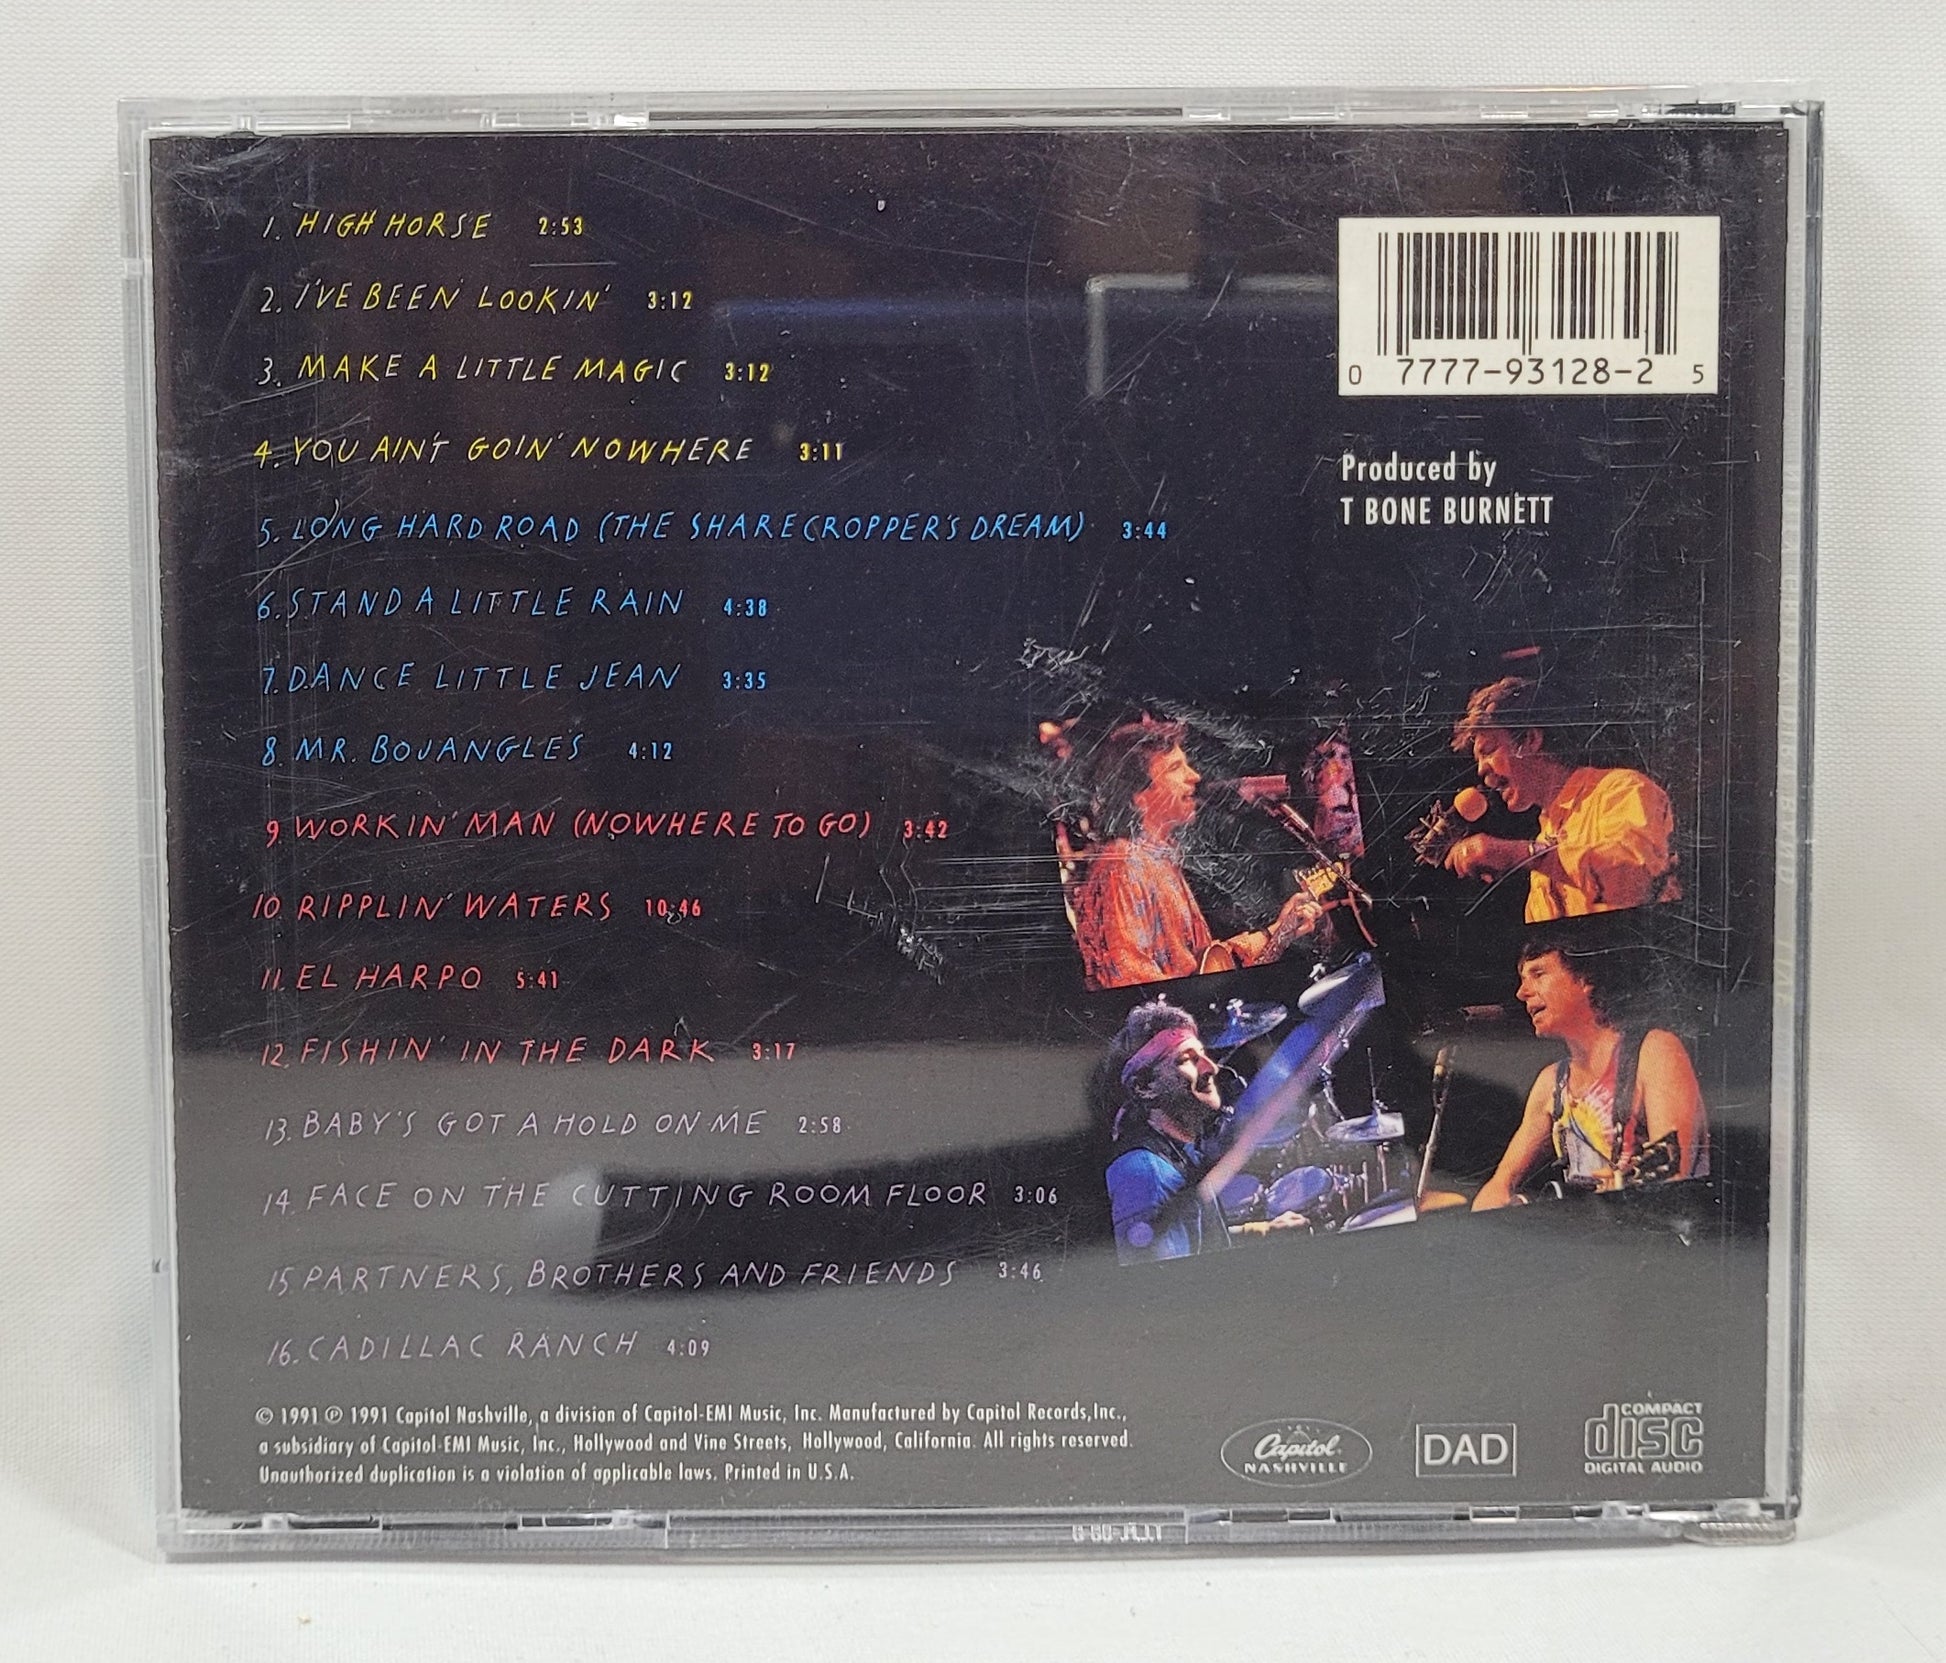 Nitty Gritty Dirt Band - Live Two Five [1991 Used CD]